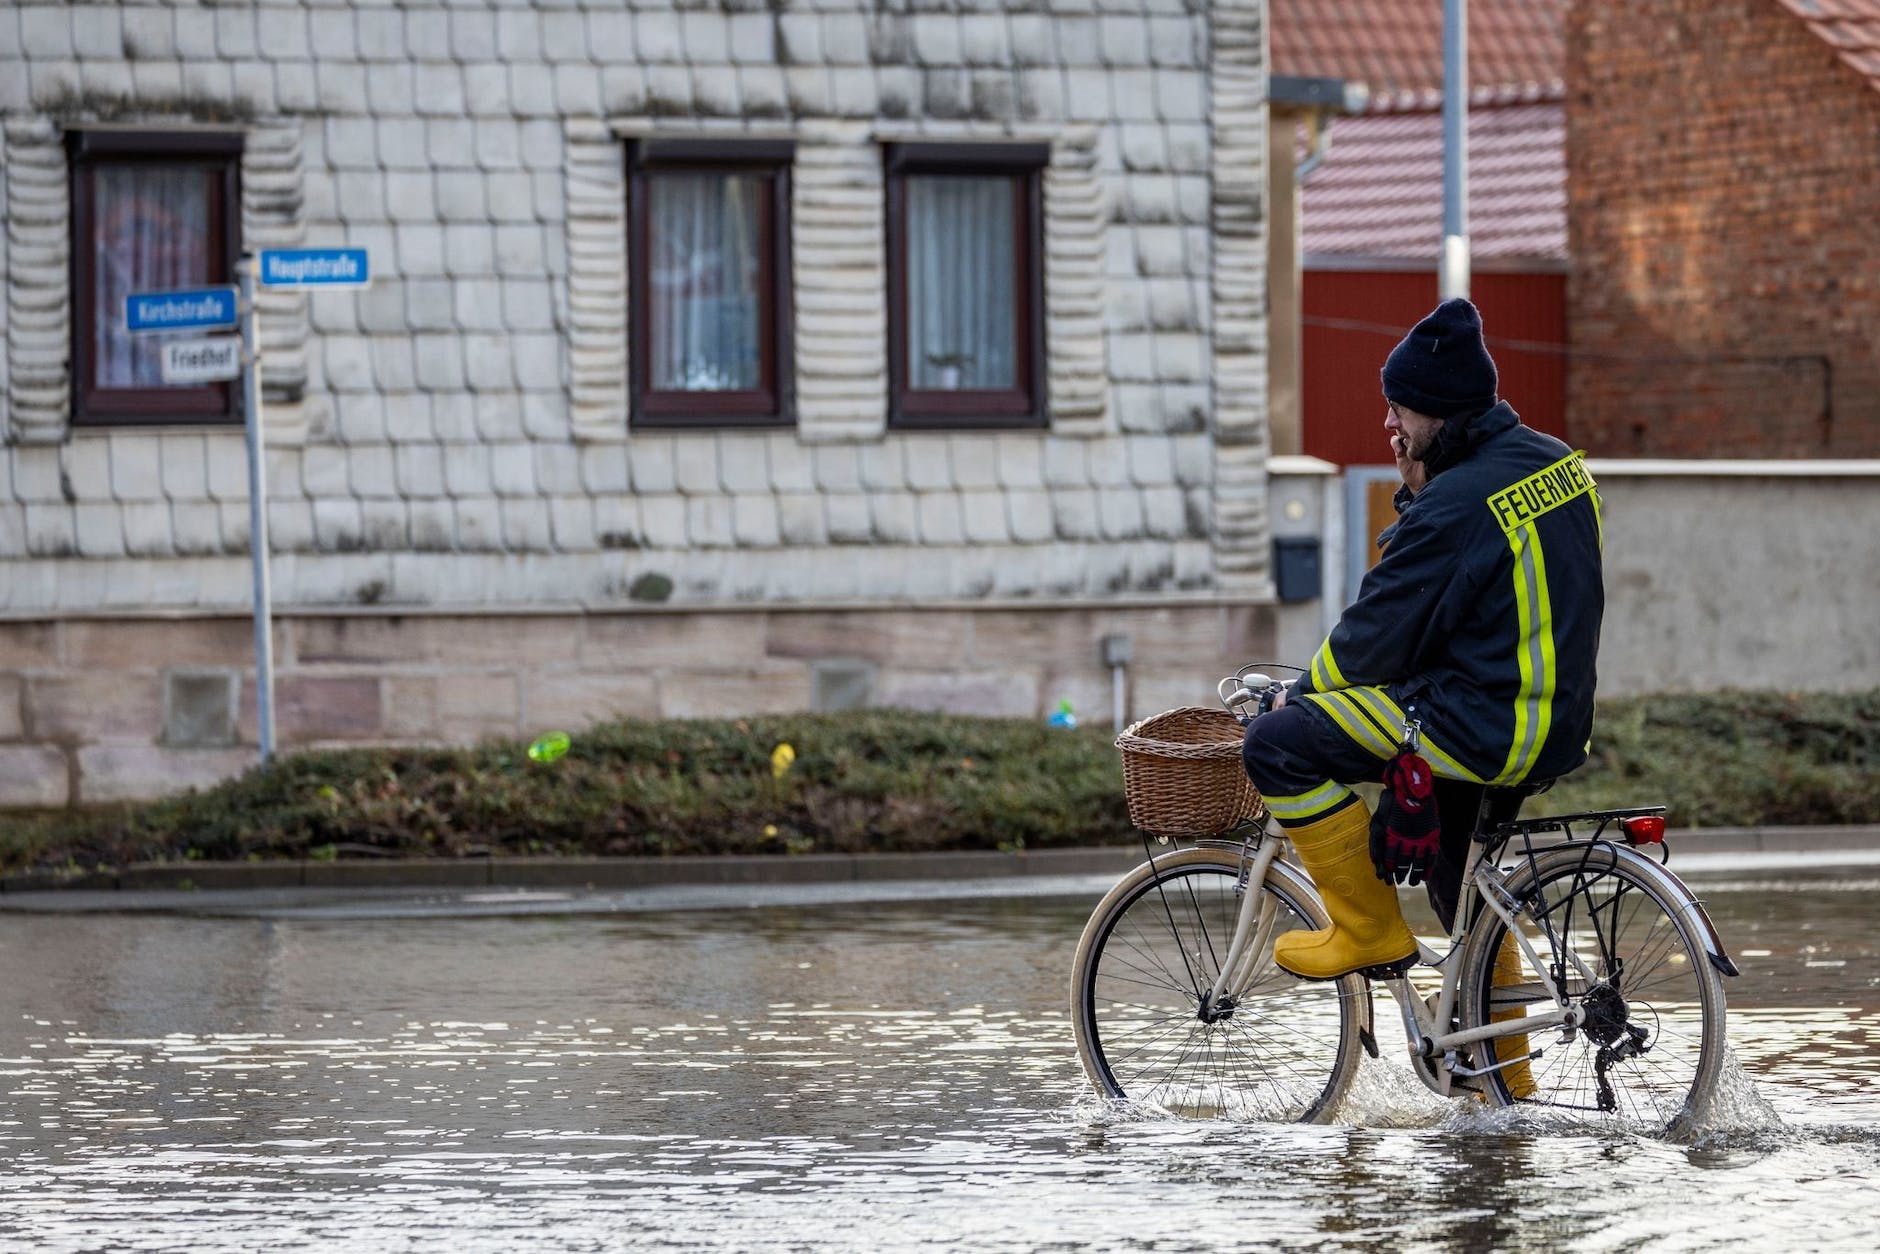 A firefighter on a bicycle in a flooded street in Windehausen.